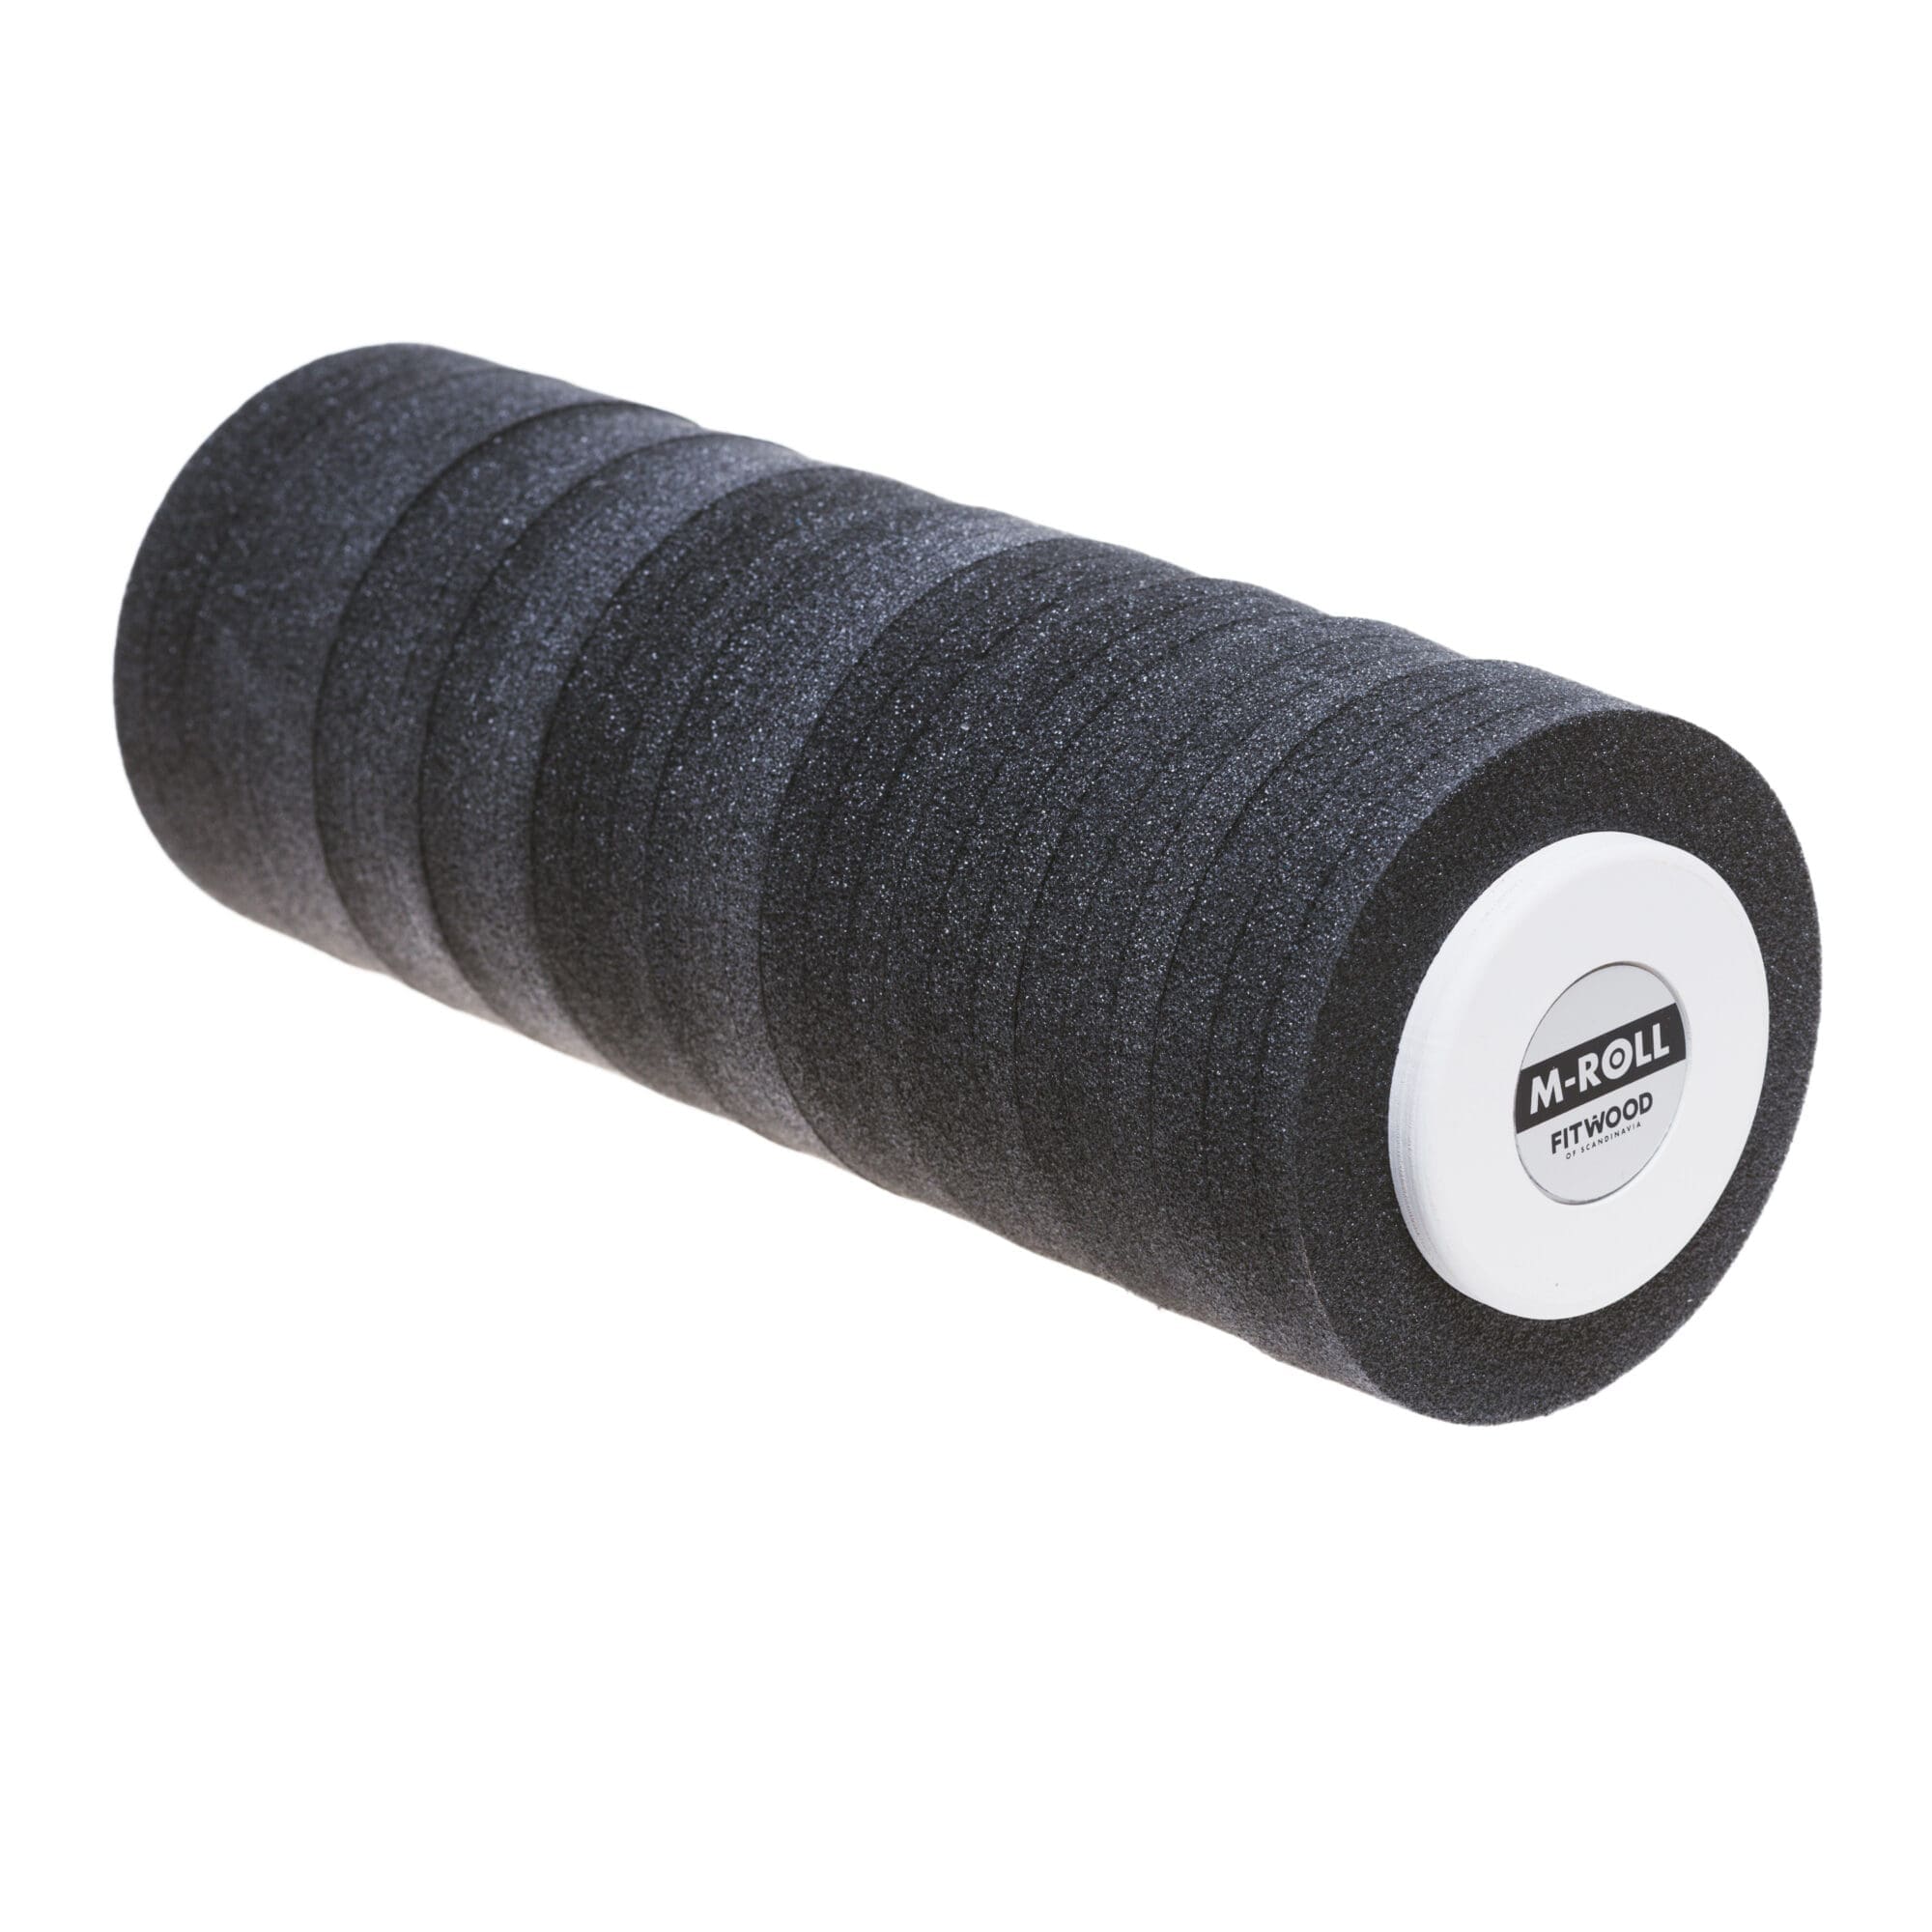 FitWood_M-ROLL_35_massage_roller _white_wood_graphite_grey_covering_product_image